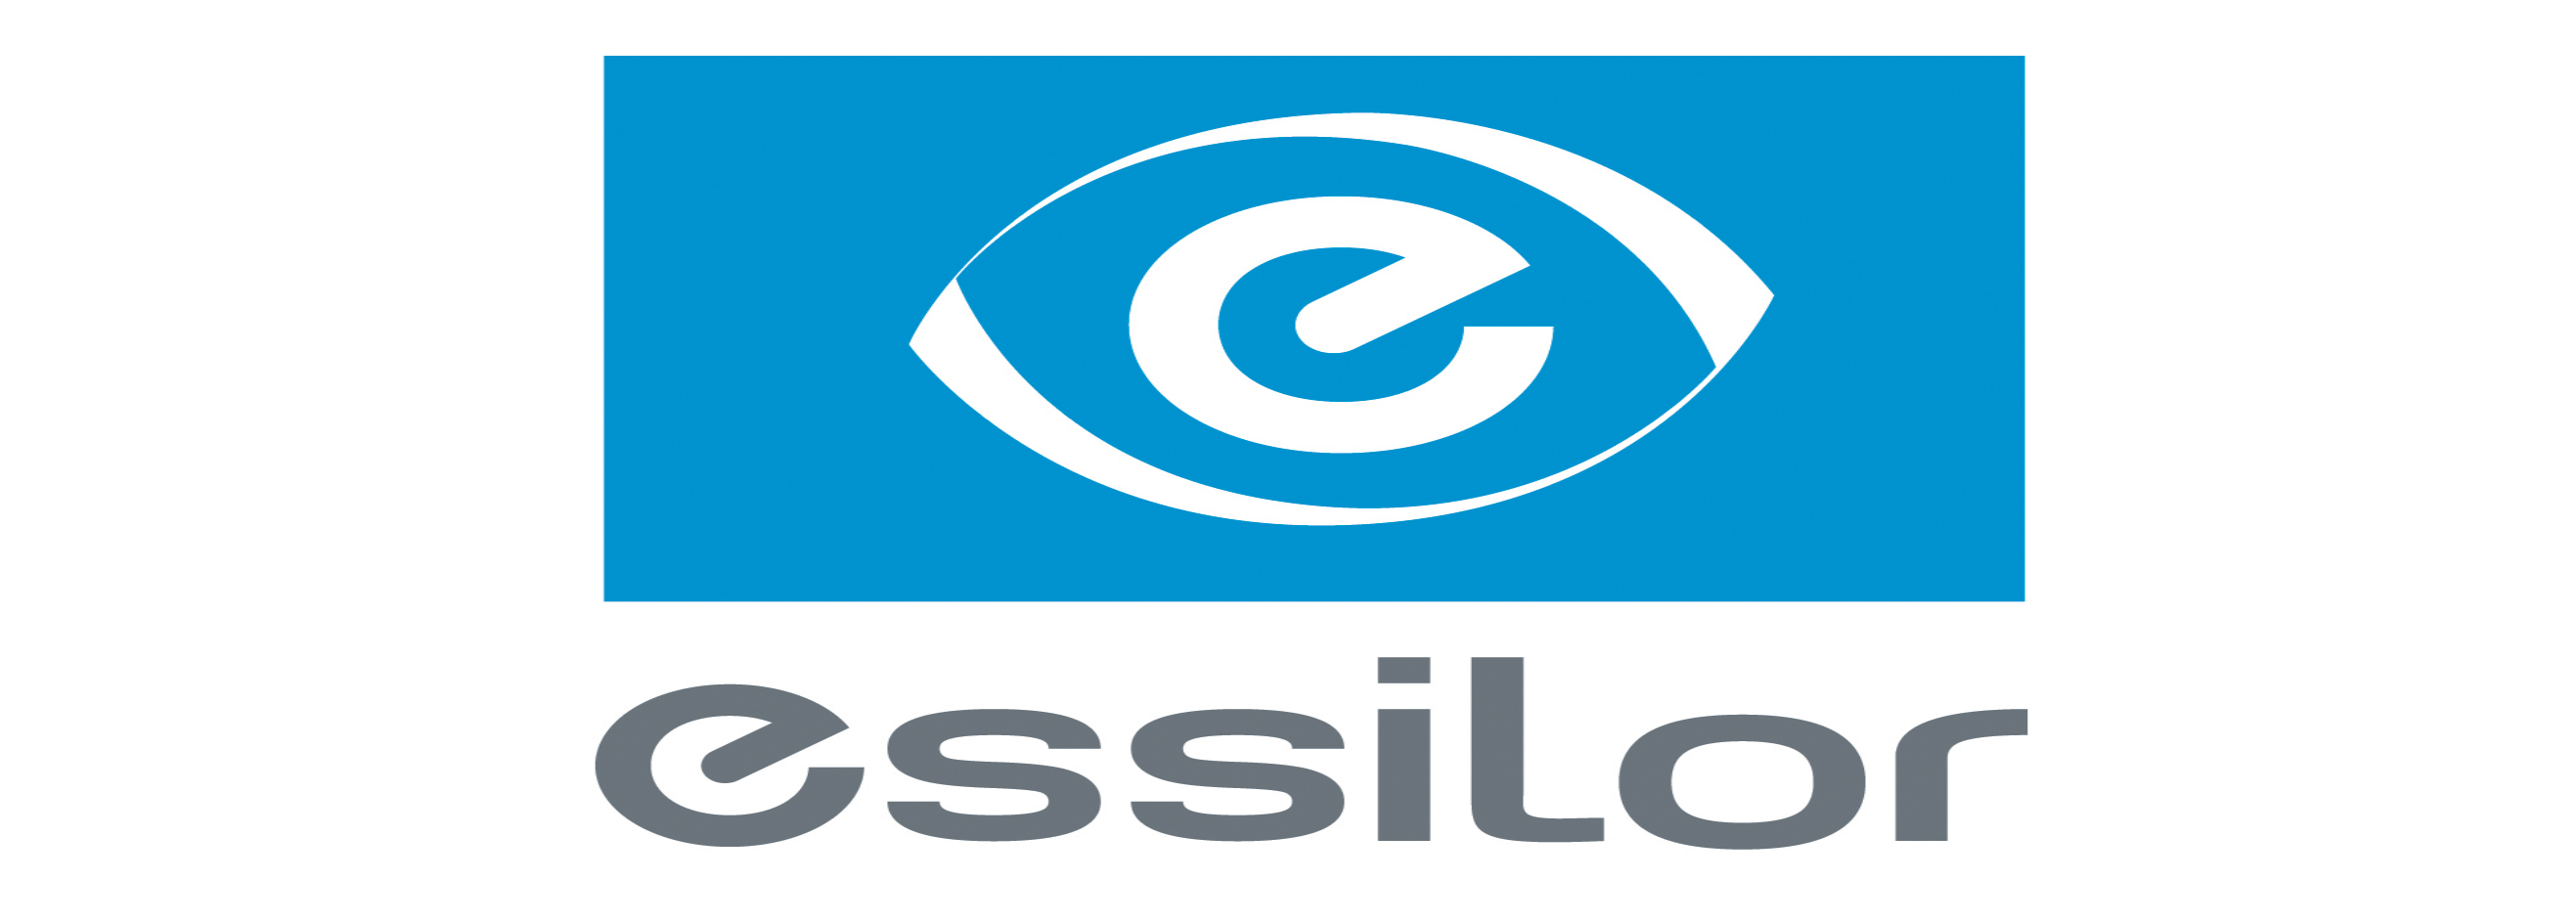 IcareLabs is a certified Essilor digital processing lab